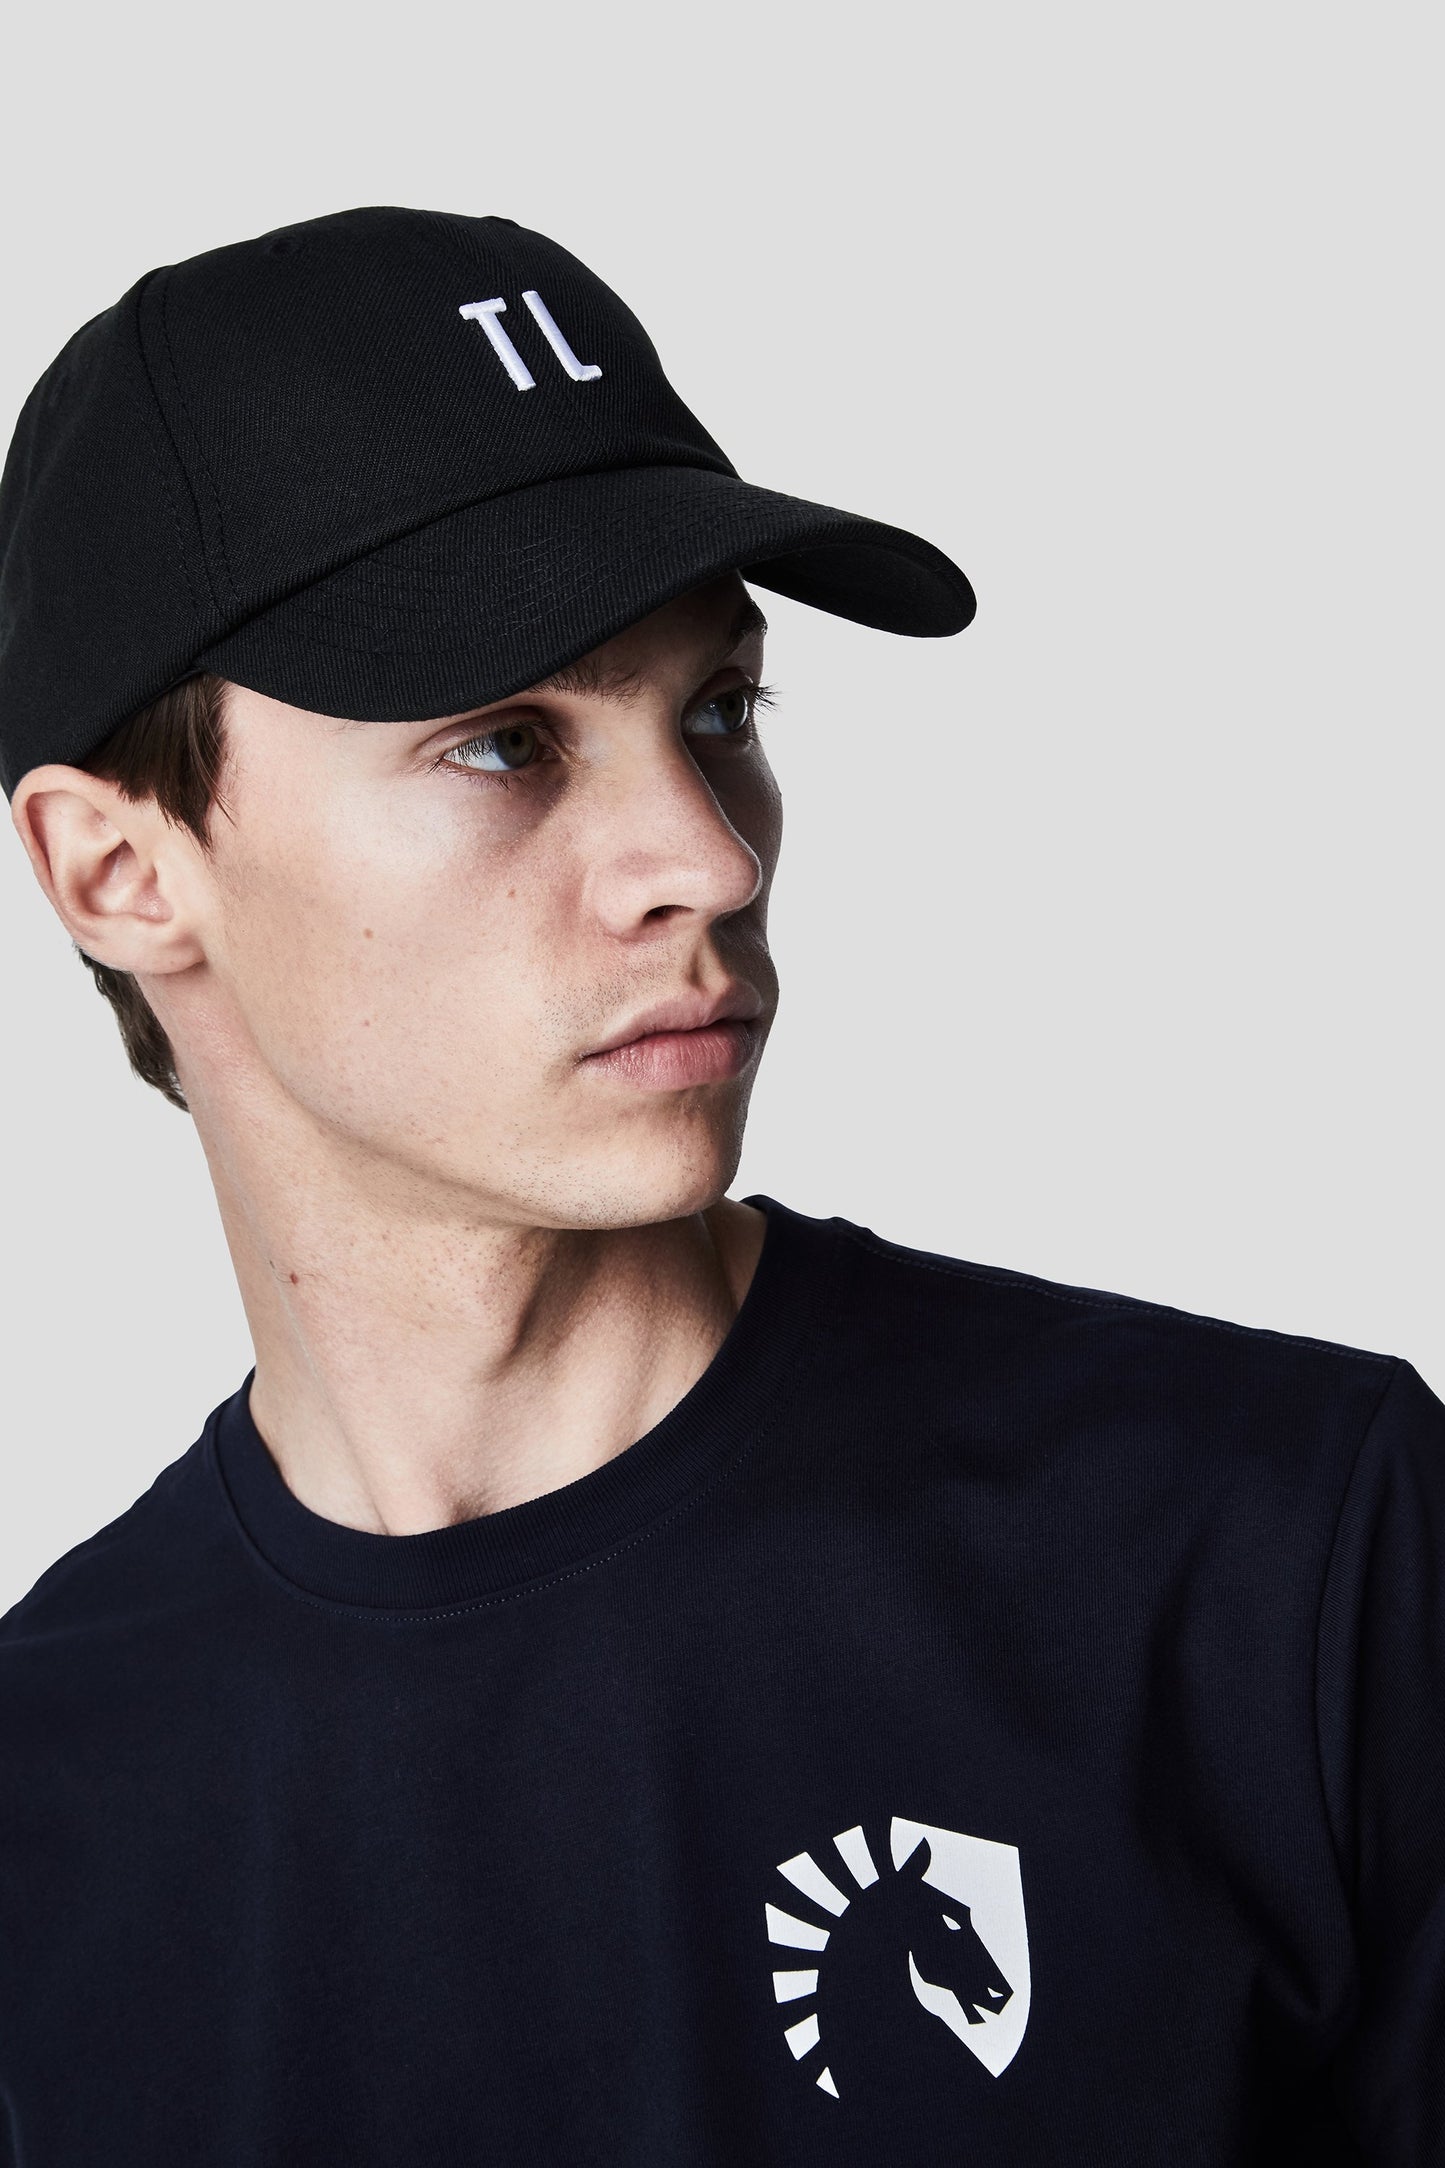 LIQUID CITY TWILL SPORTS CAP WITH LEATHER CLASP